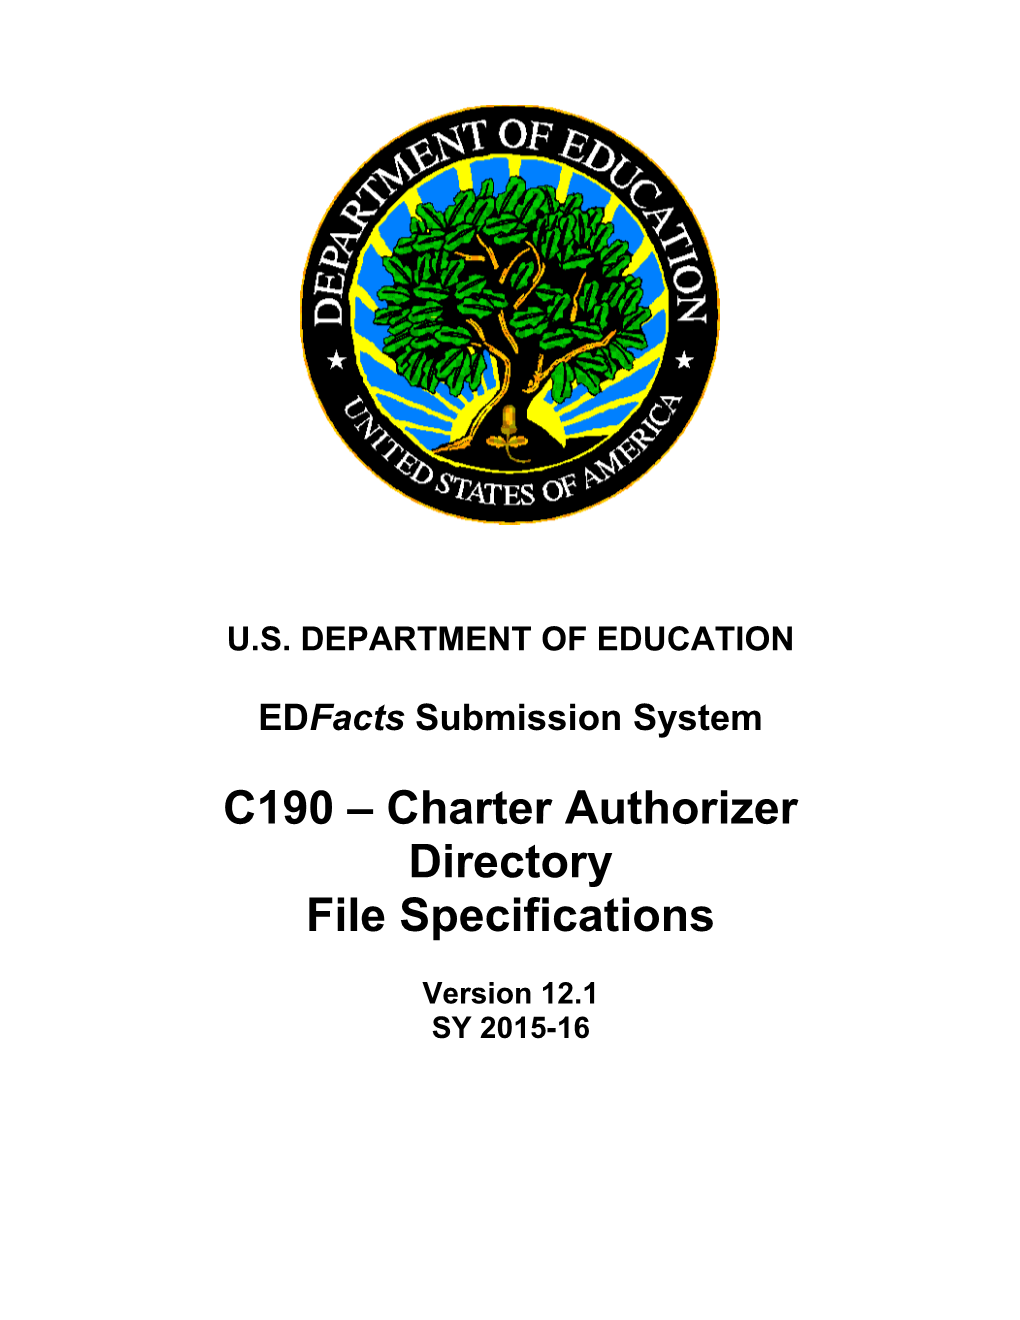 Charter School Authorizer Roster